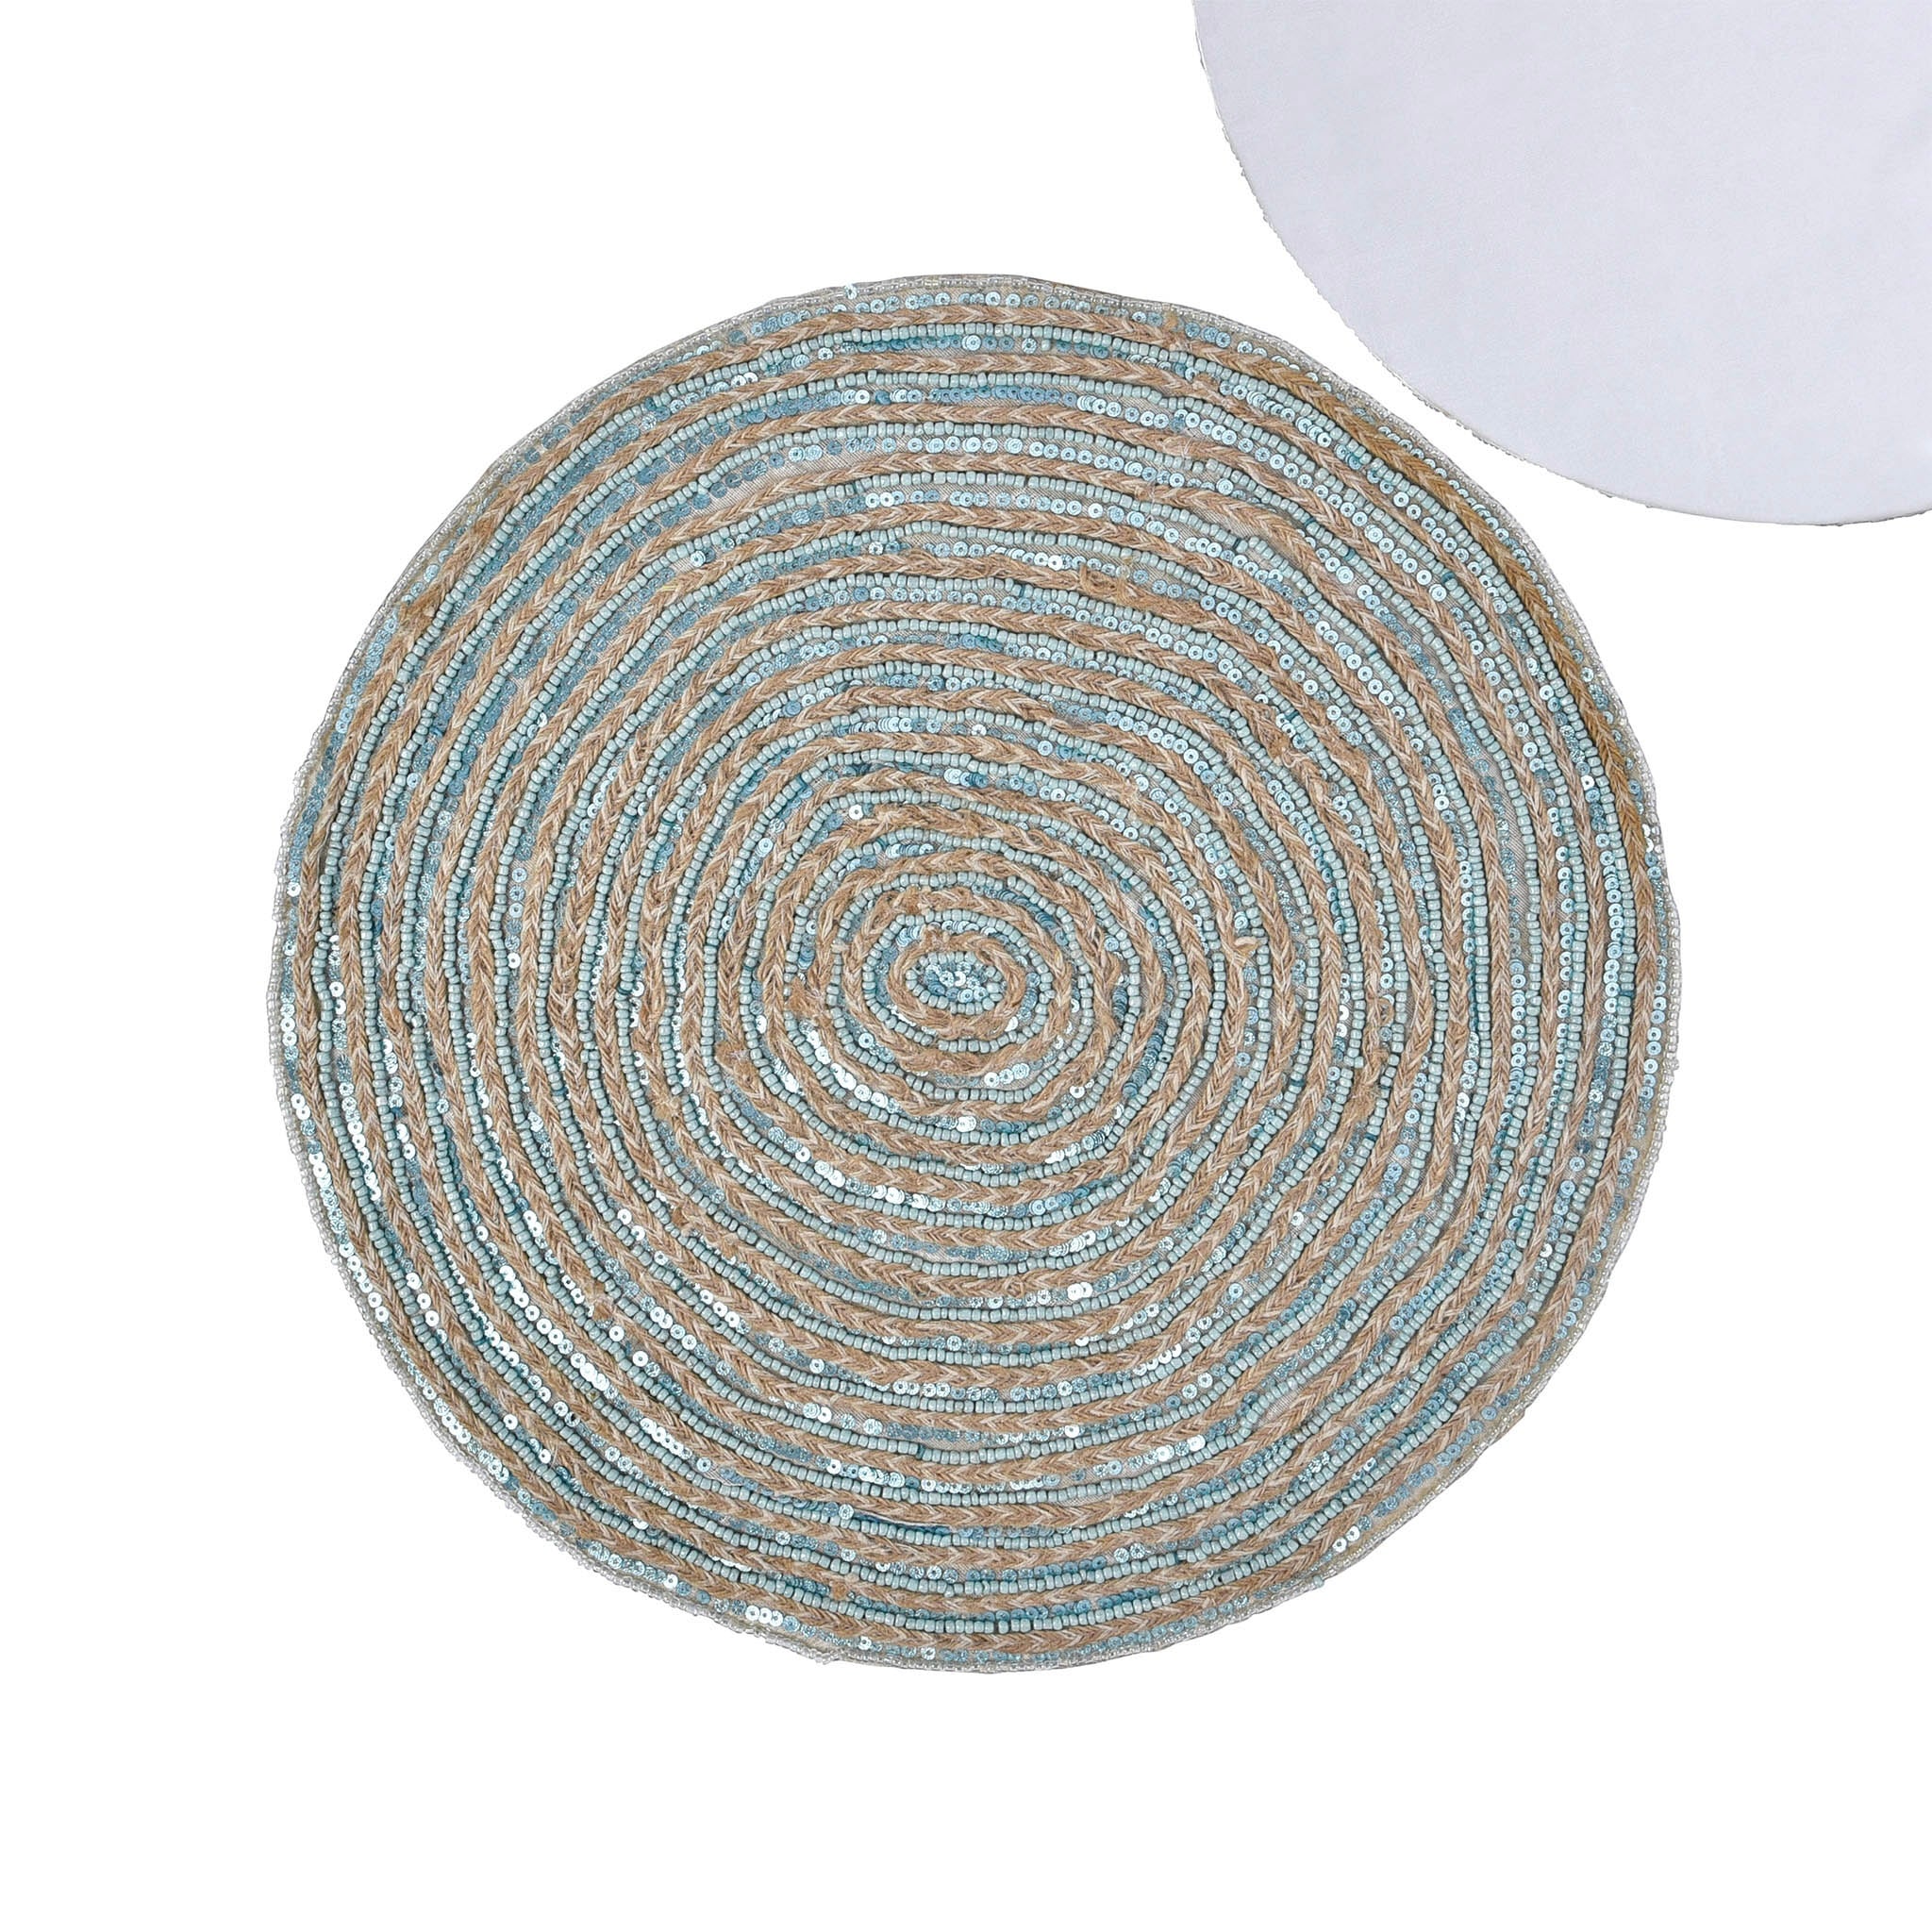 Jute Embroidered Placemat<br>Color: Teal & Natural<br>Size: 15" Round<br>Set of 2/4